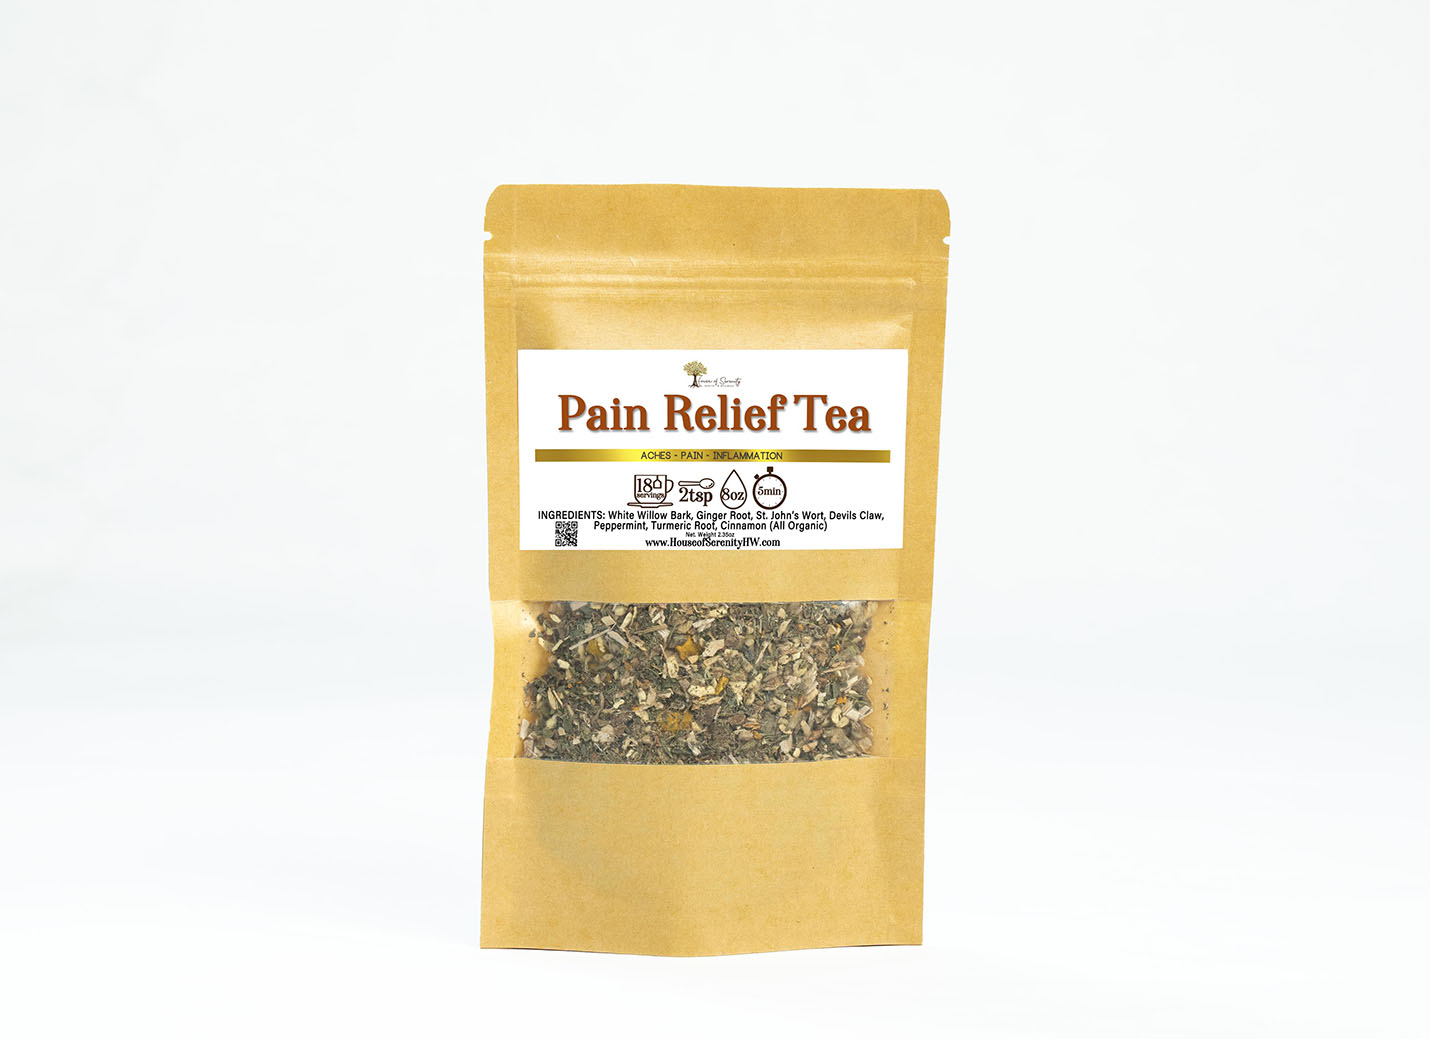 Pain Relief Tea by House of Serenity Health and Wellness